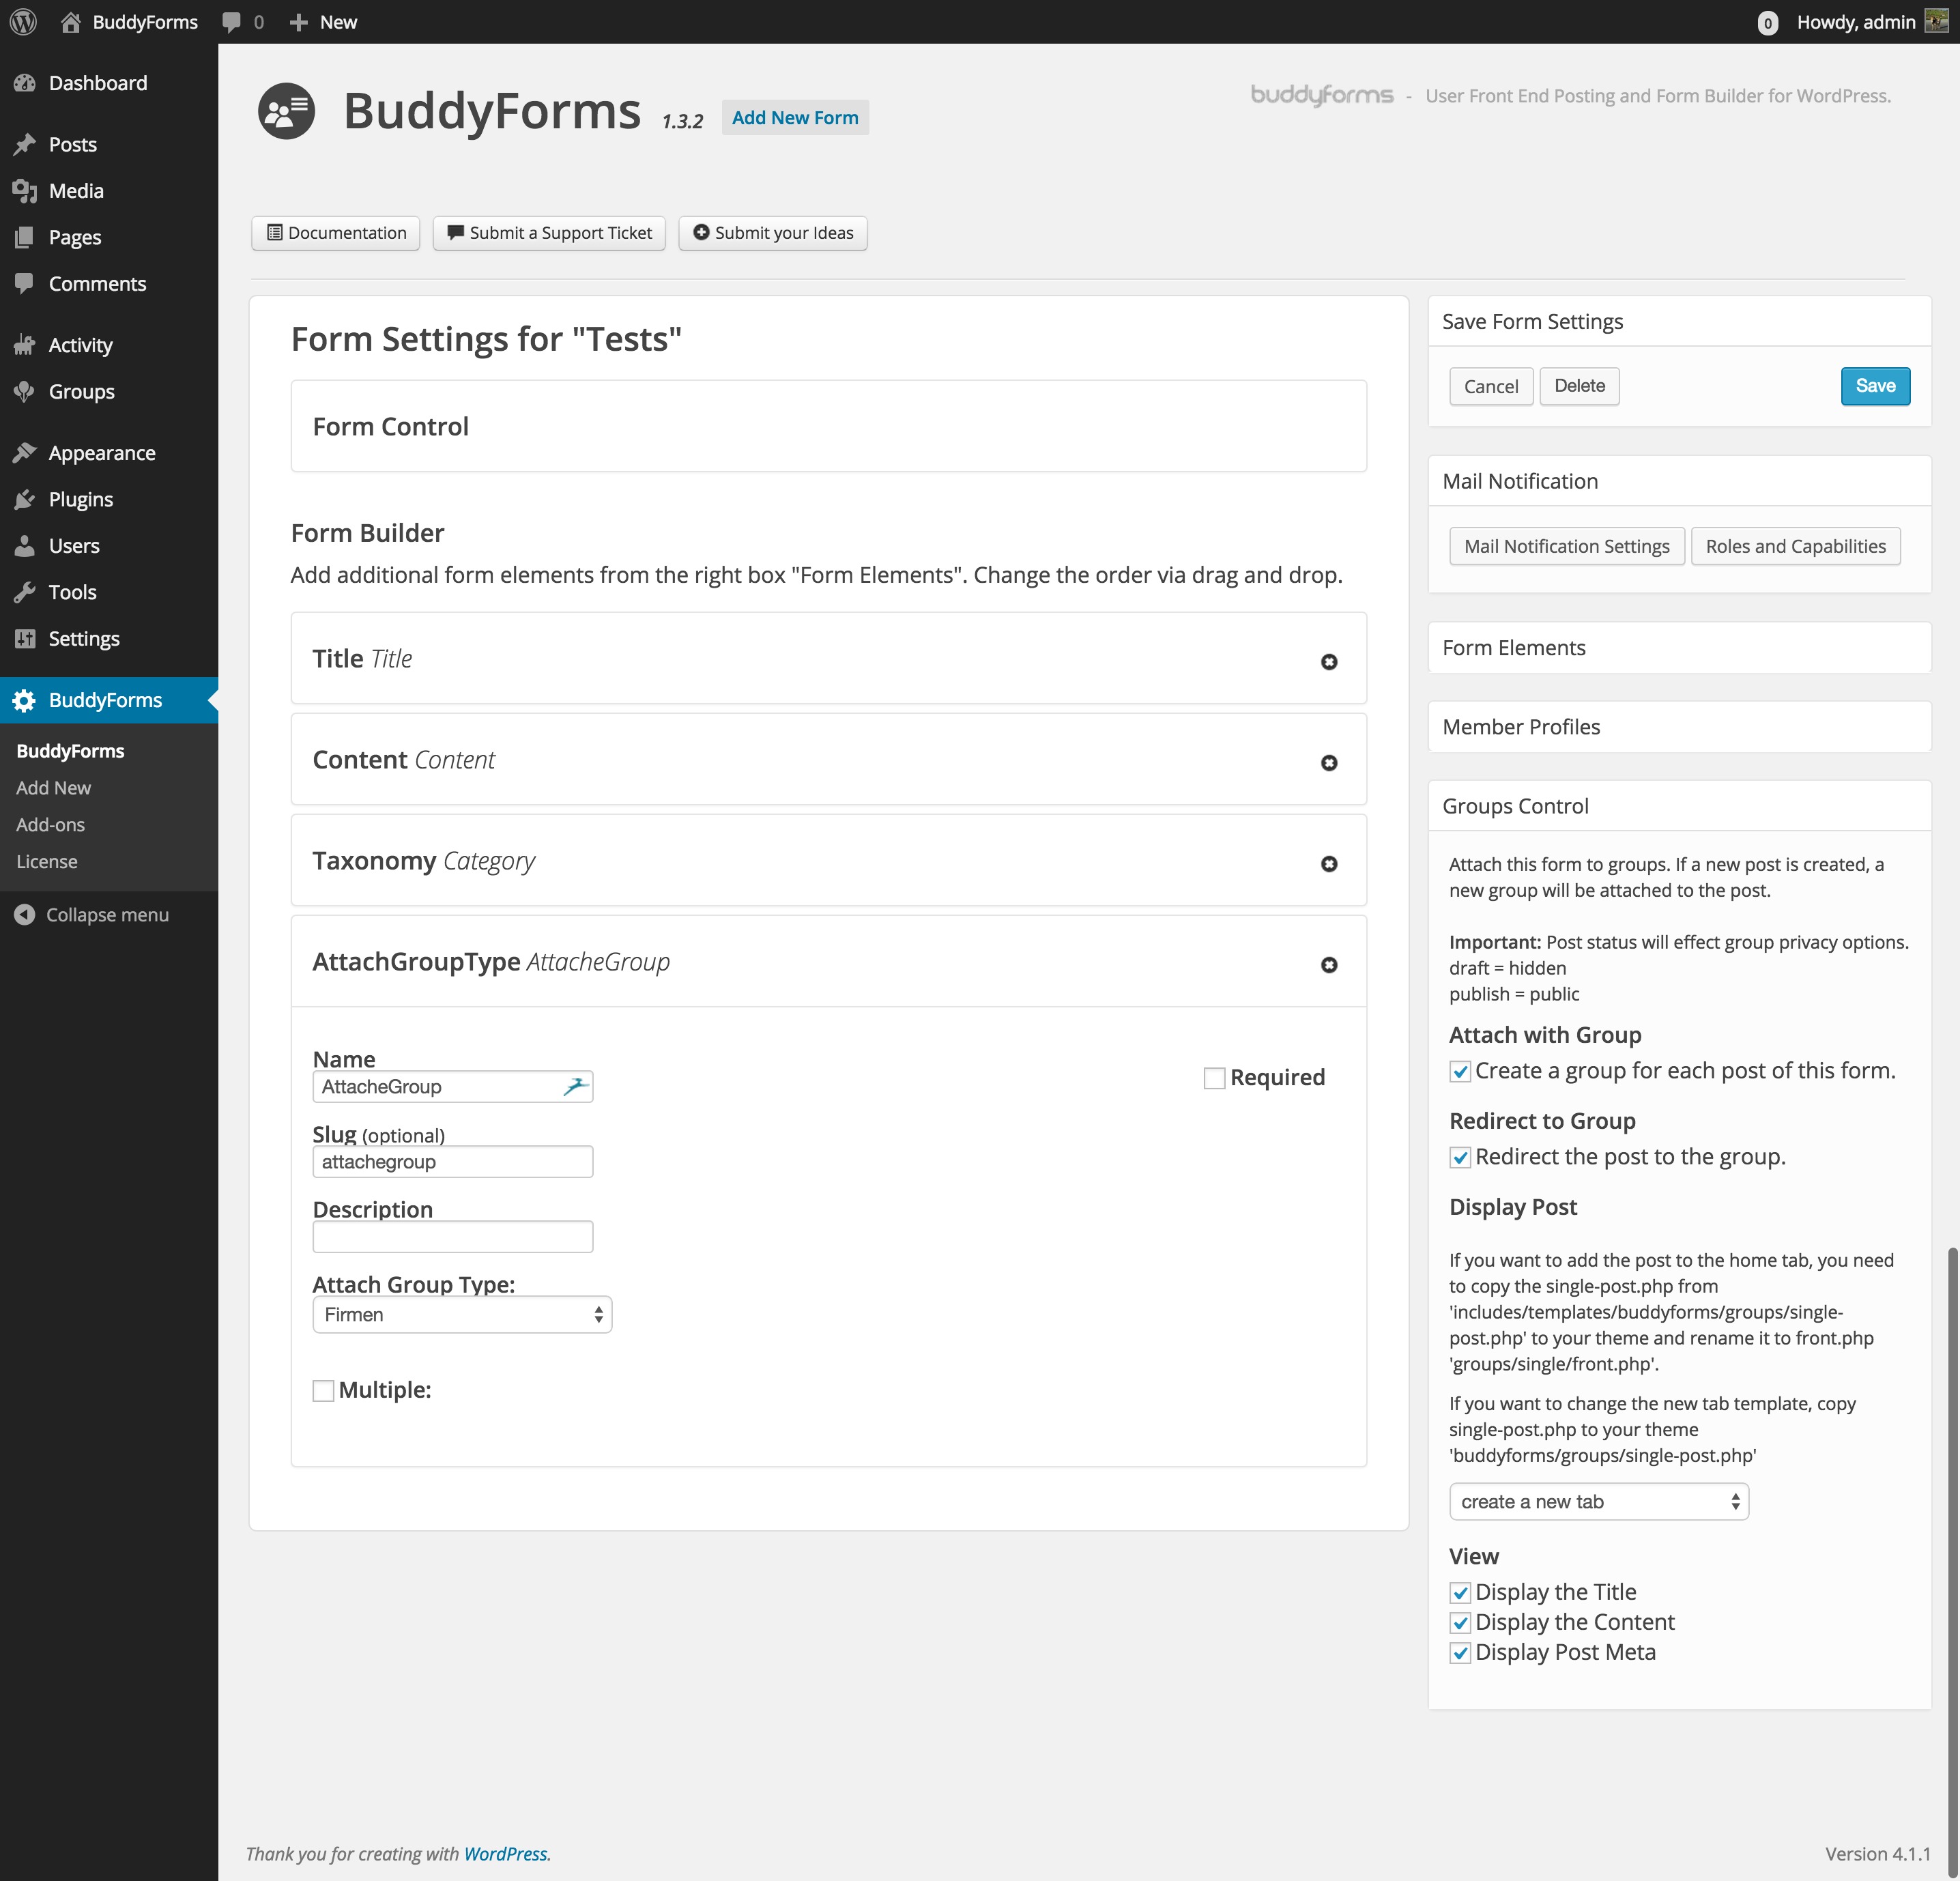 **Overview FormBuilder** - This is a Screenshot of the Form builder with BuddyForms Attached Groups enabled.